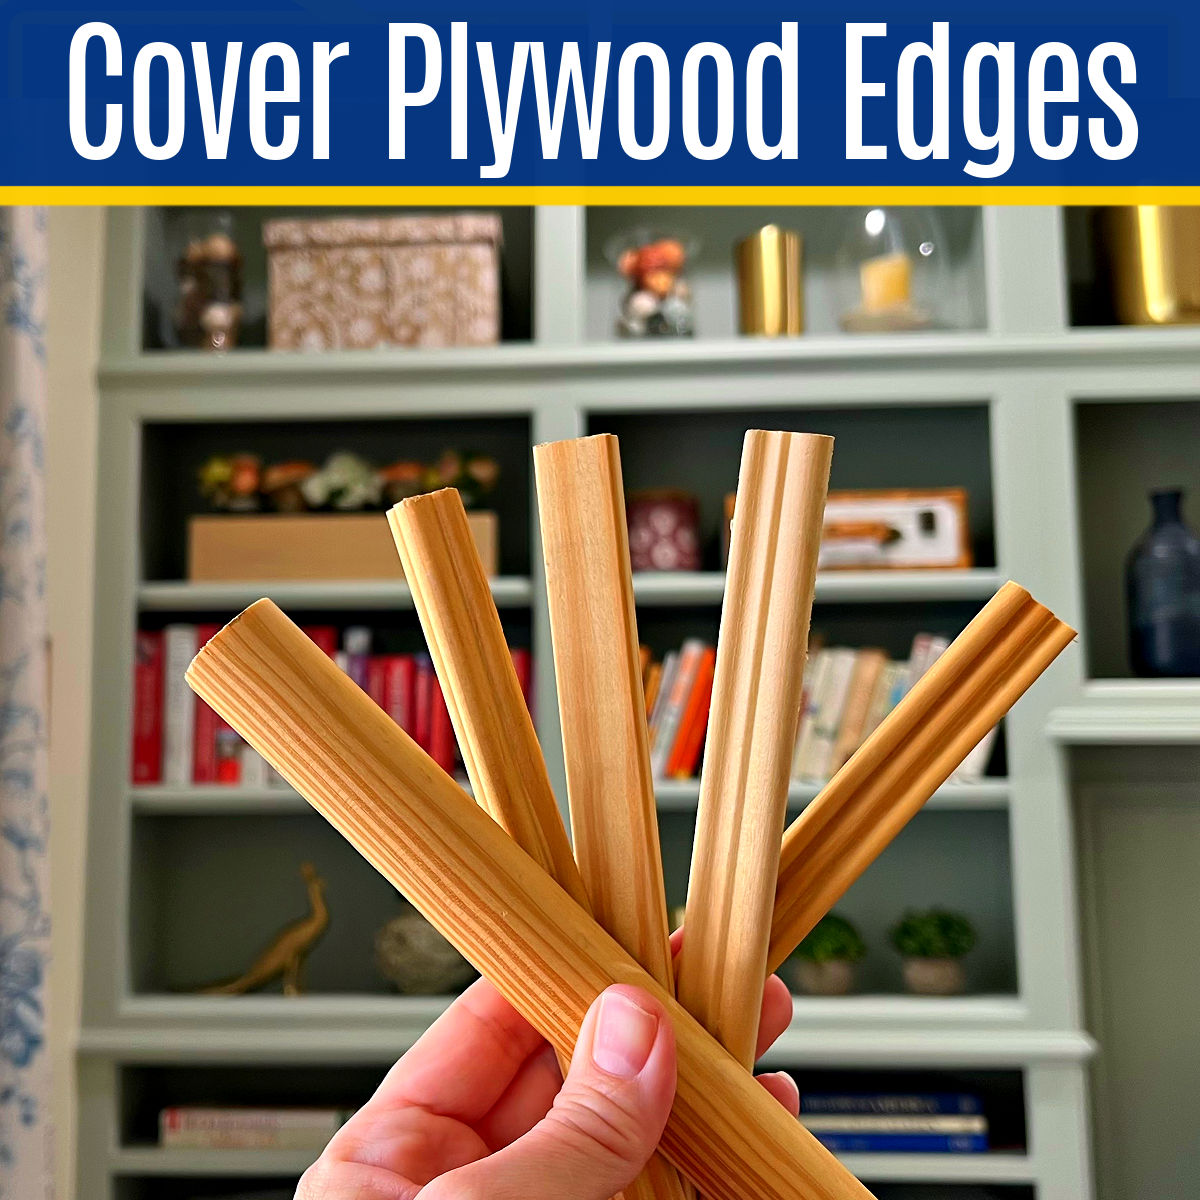 How to Add Edge Banding To Plywood